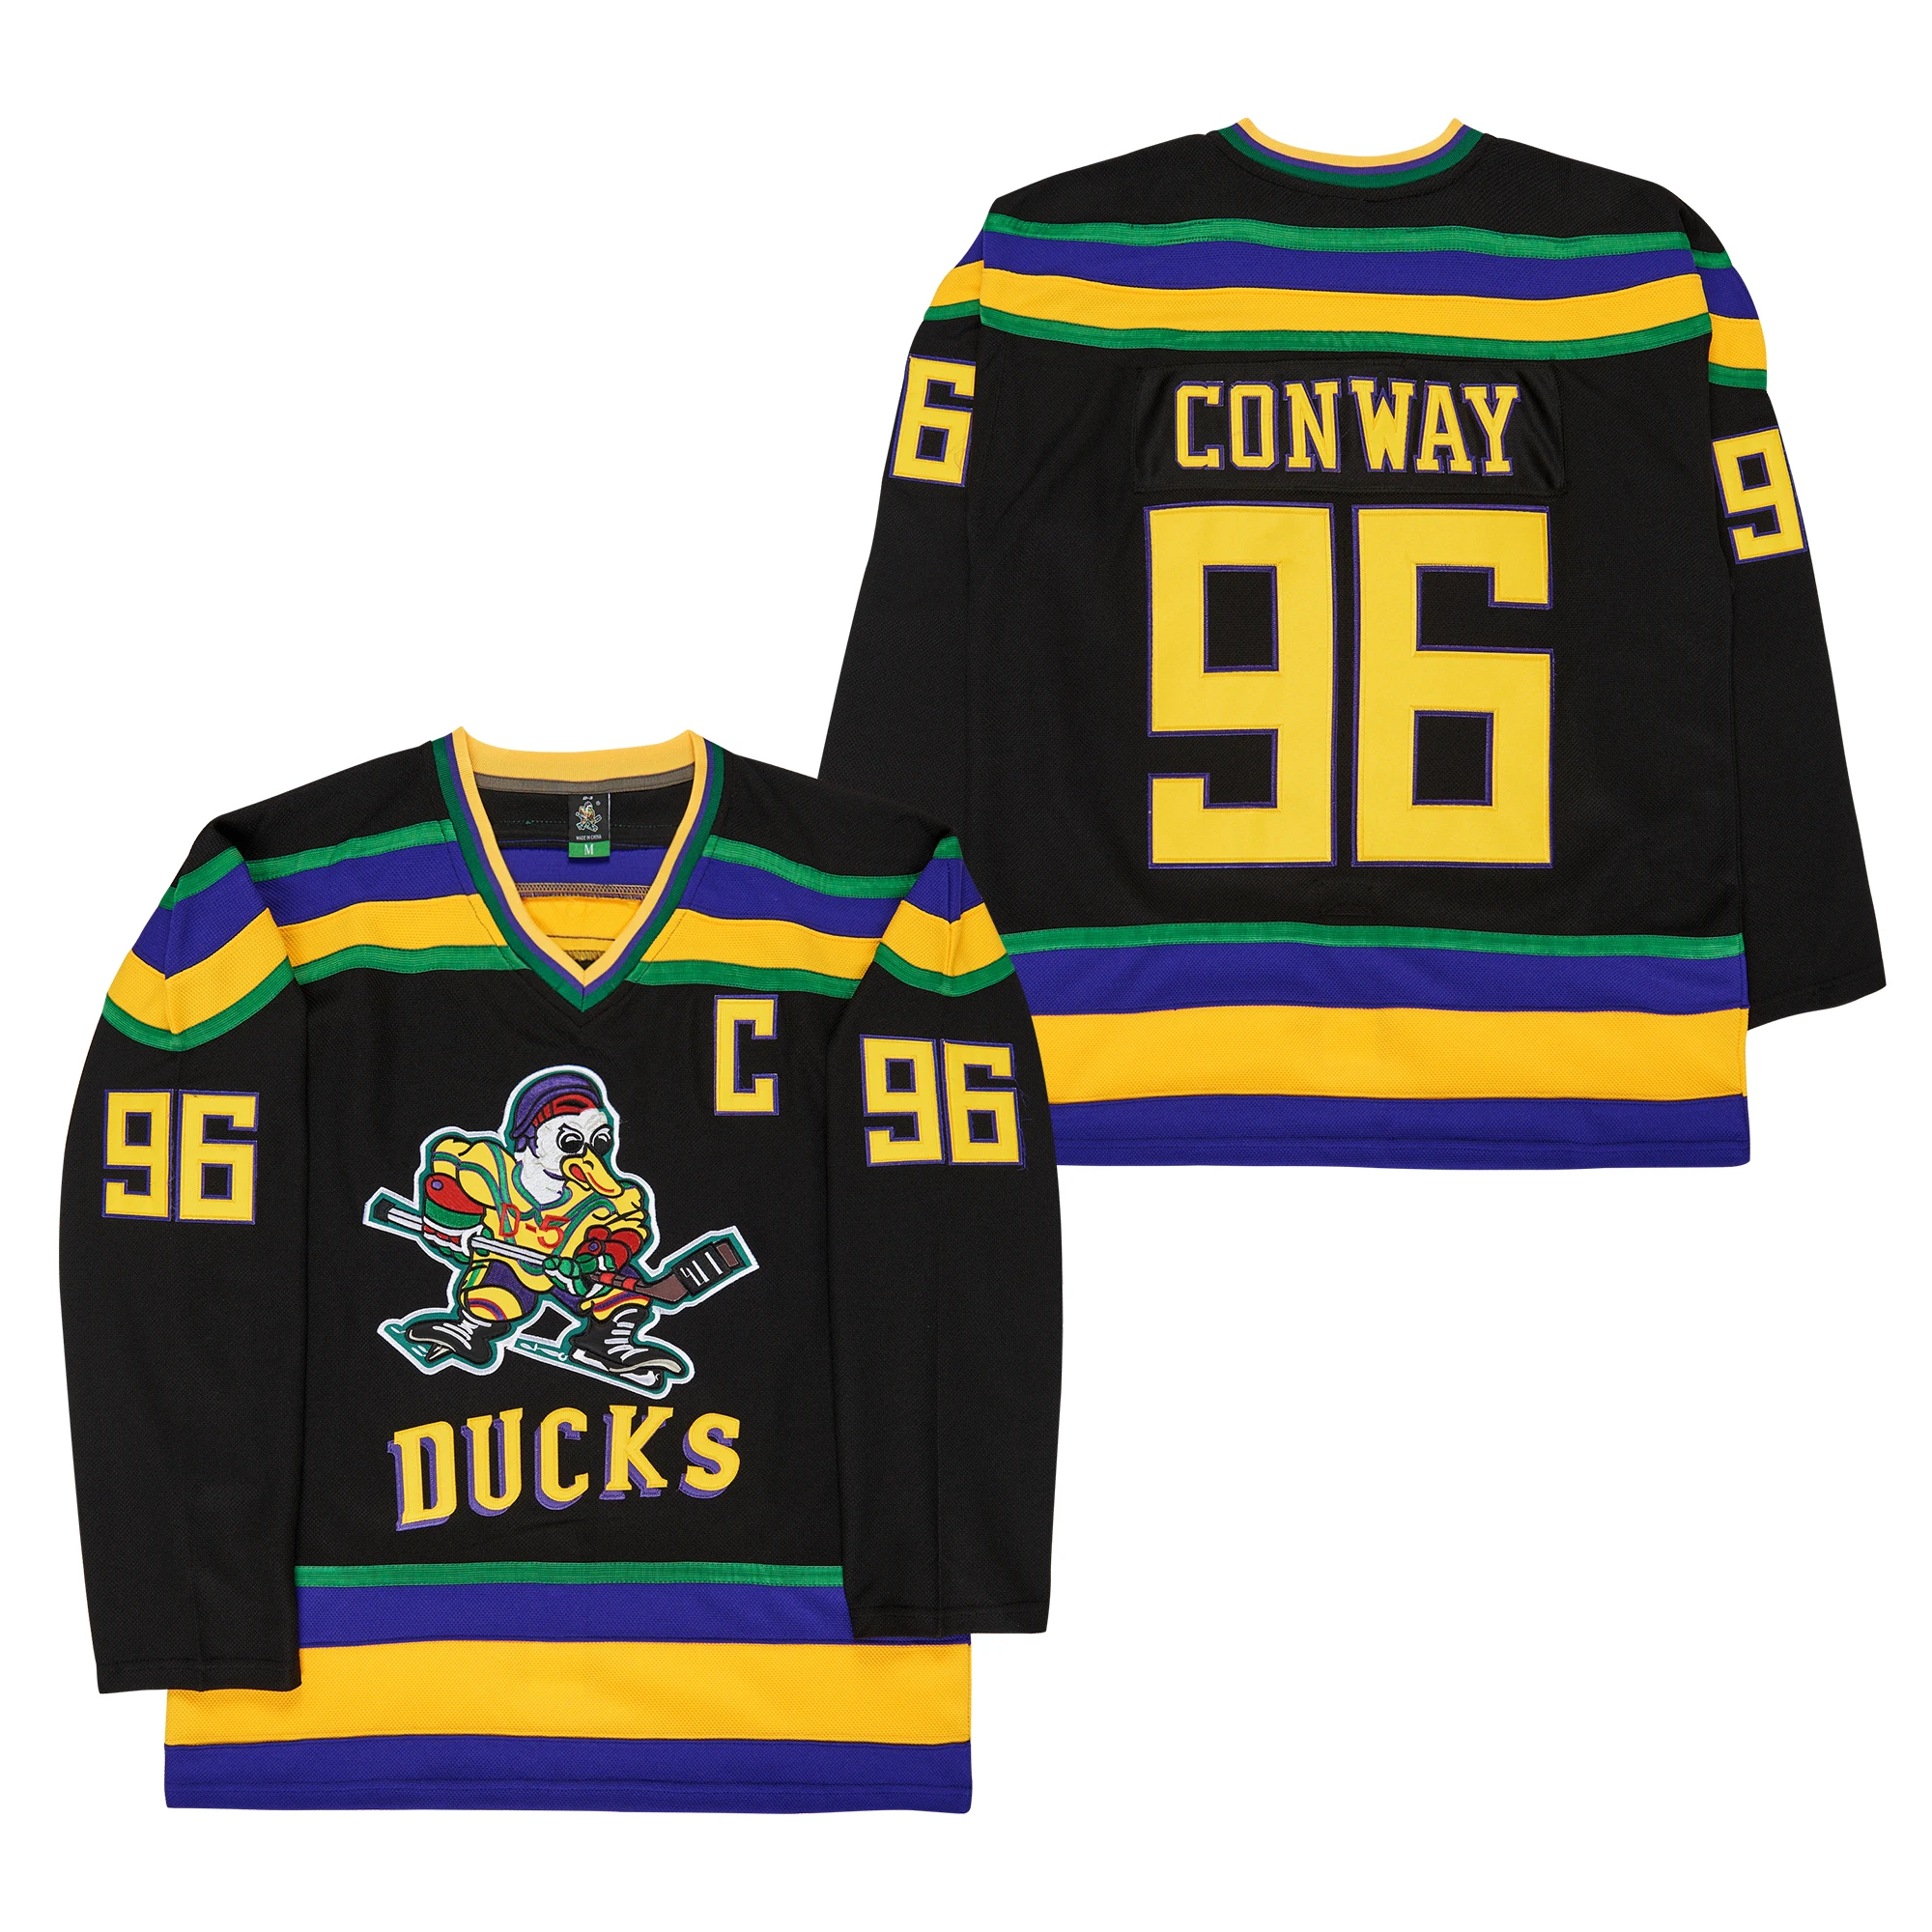 

Wholesale Cheap Anaheim #96 Conway Black Mighty Ducks Jersey For Men Women Kids, Custom accepted